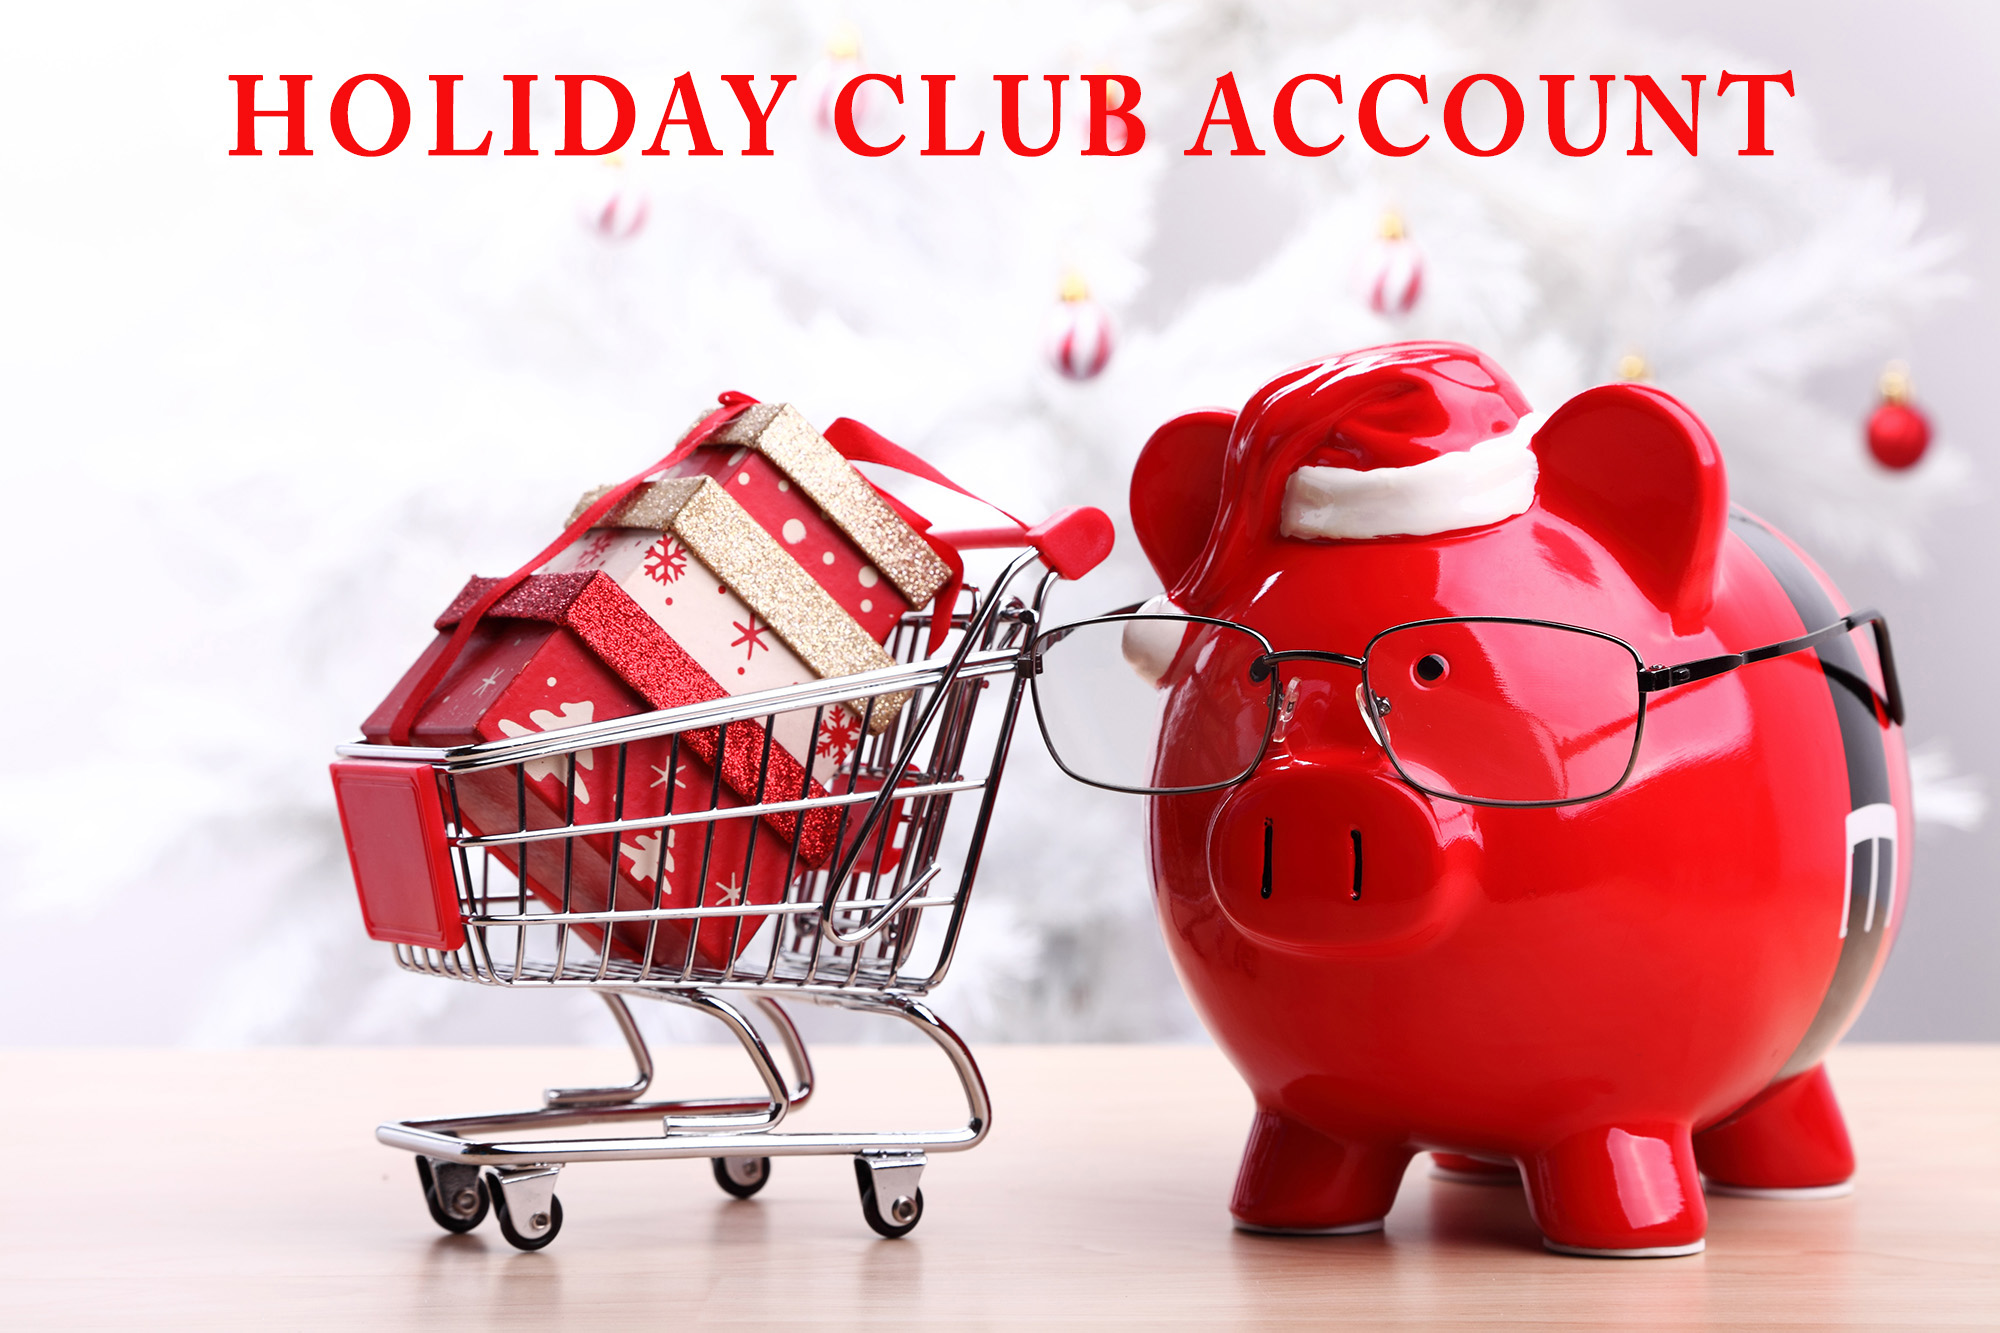 hOLIDAY cLUB aCCOUNT sPECIAL pROMO